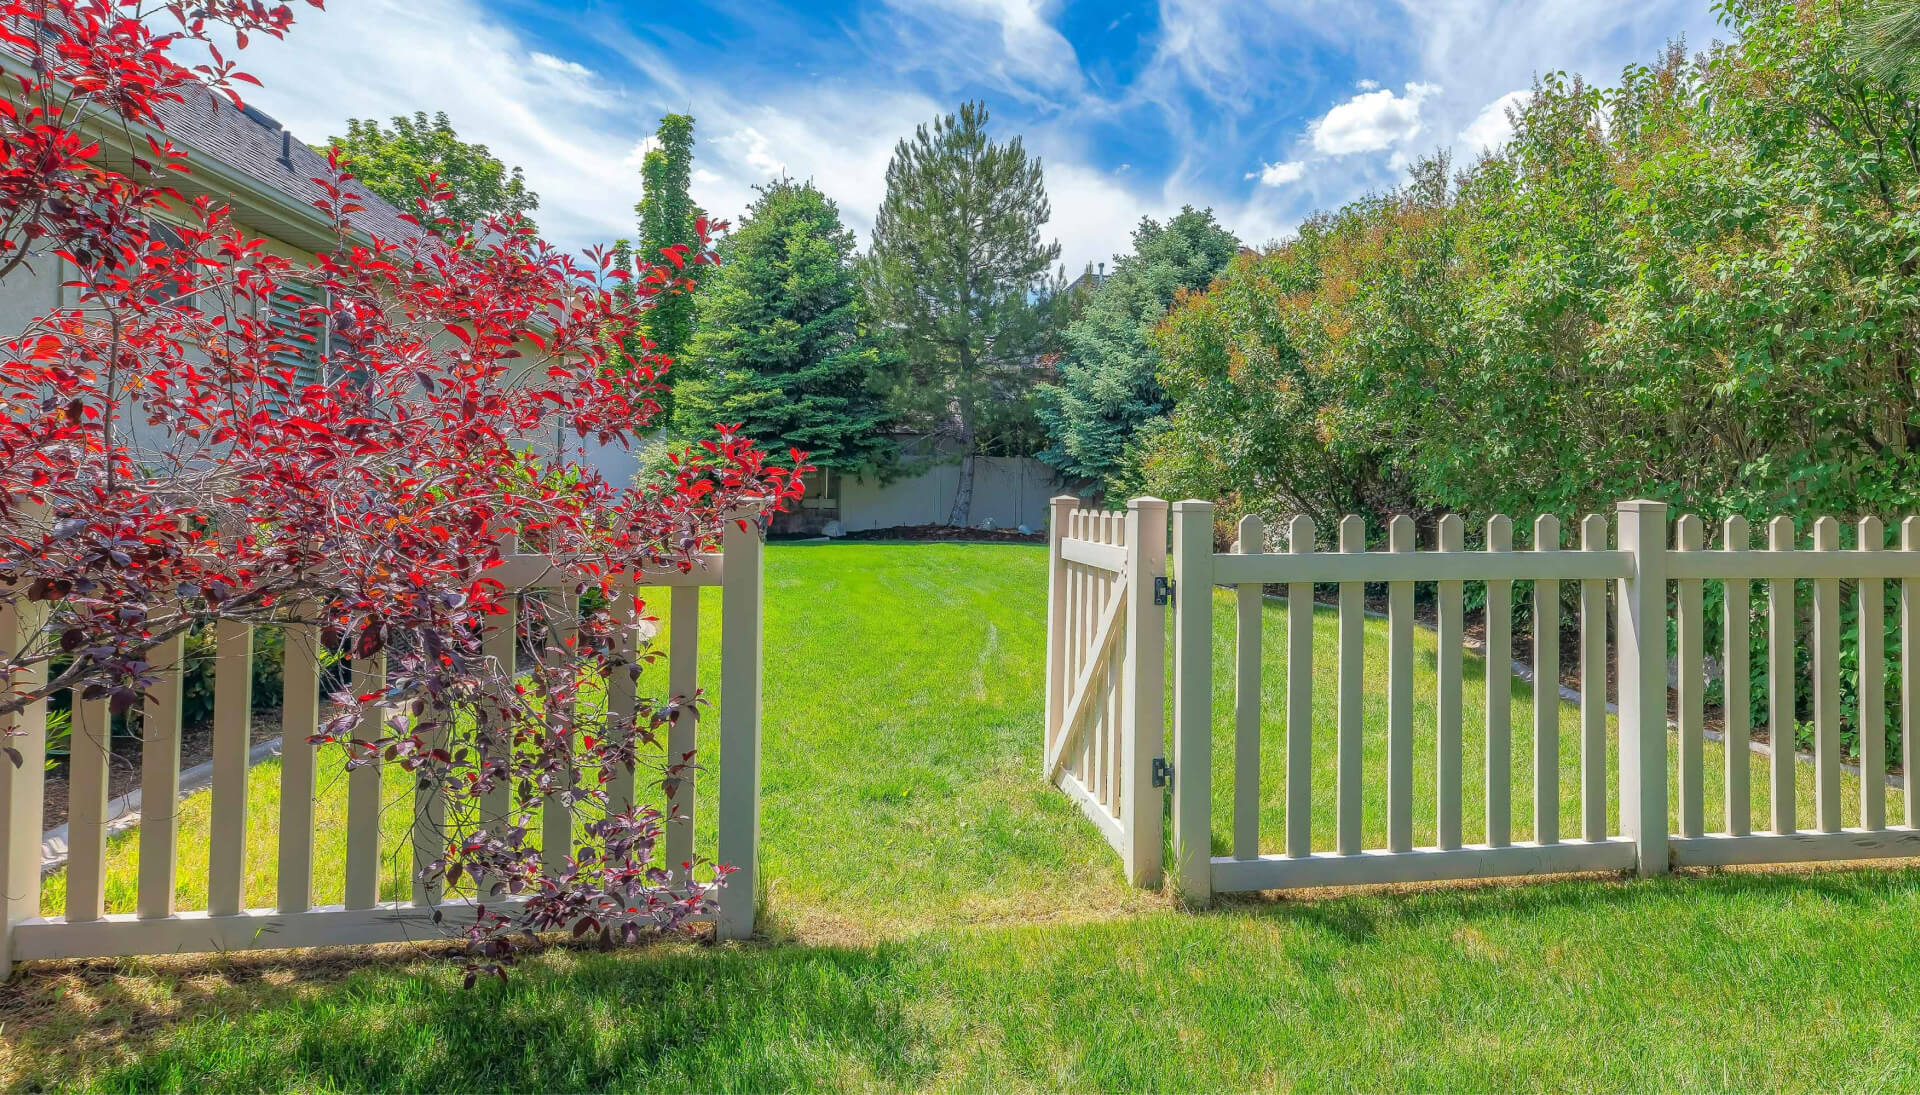 A functional fence gate providing access to a well-maintained backyard, surrounded by a wooden fence in Hampton